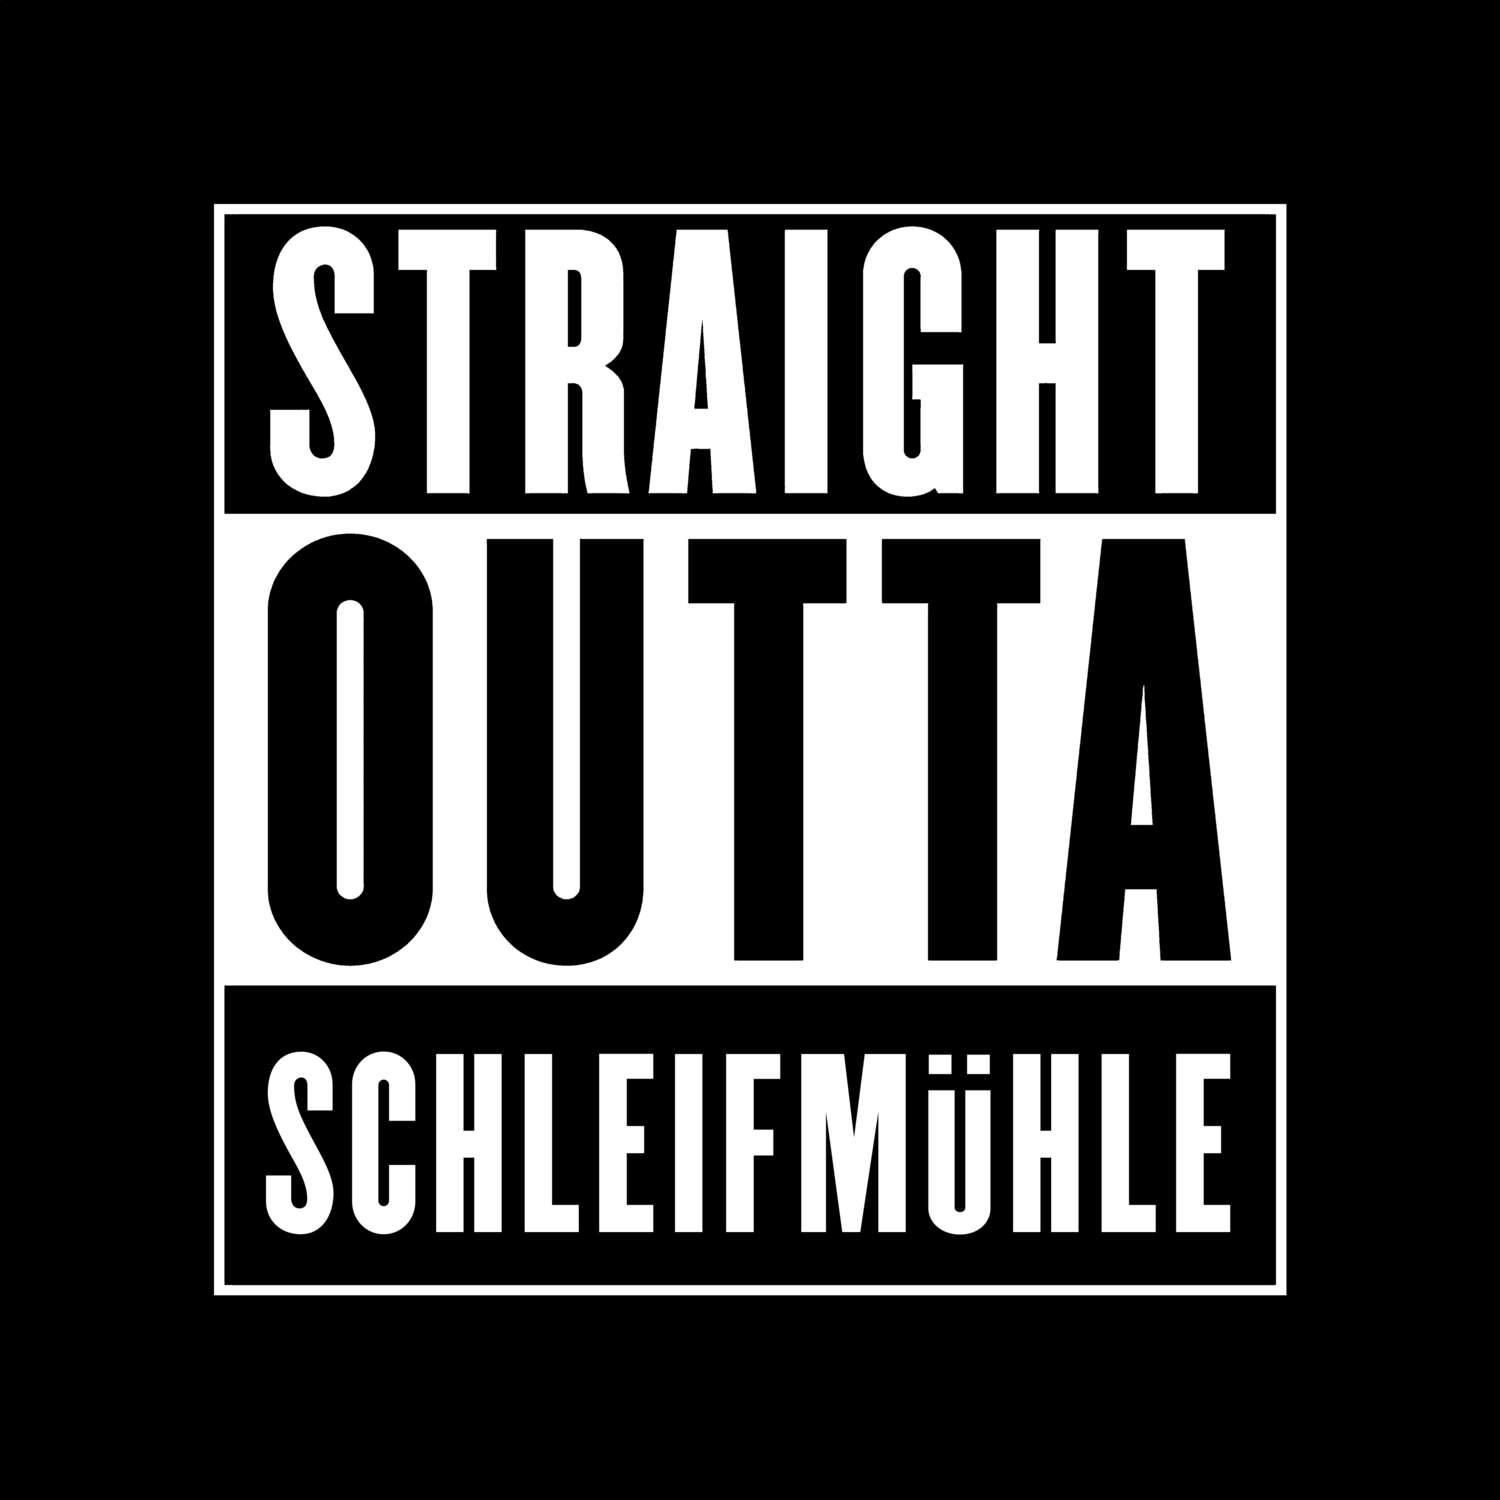 Schleifmühle T-Shirt »Straight Outta«